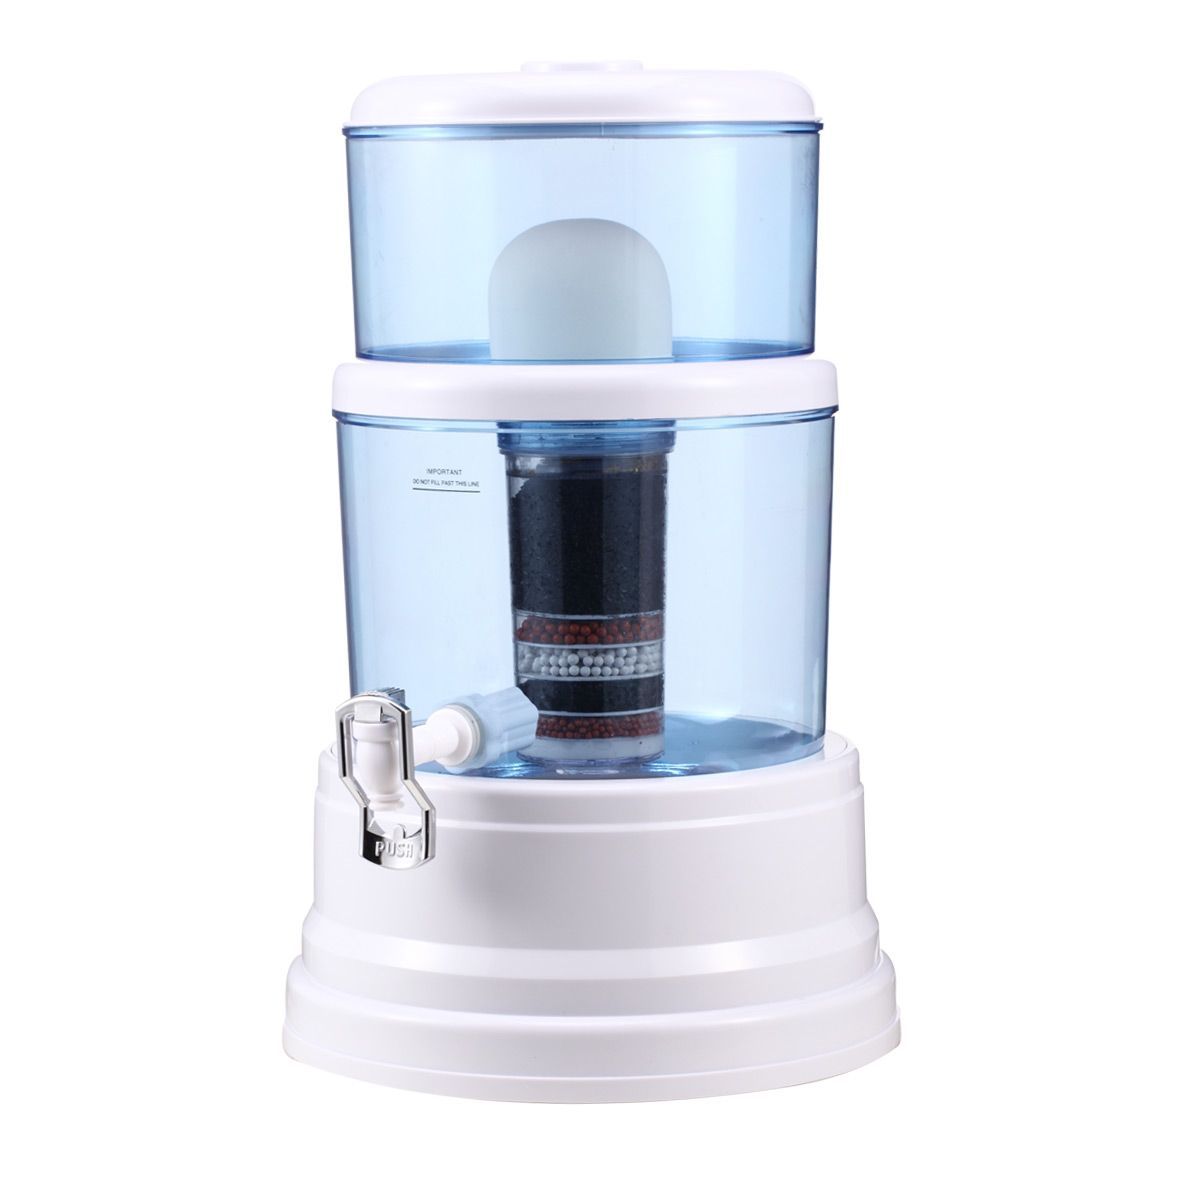 8 Stage Water Purifier Filter Water System Filtration 16L